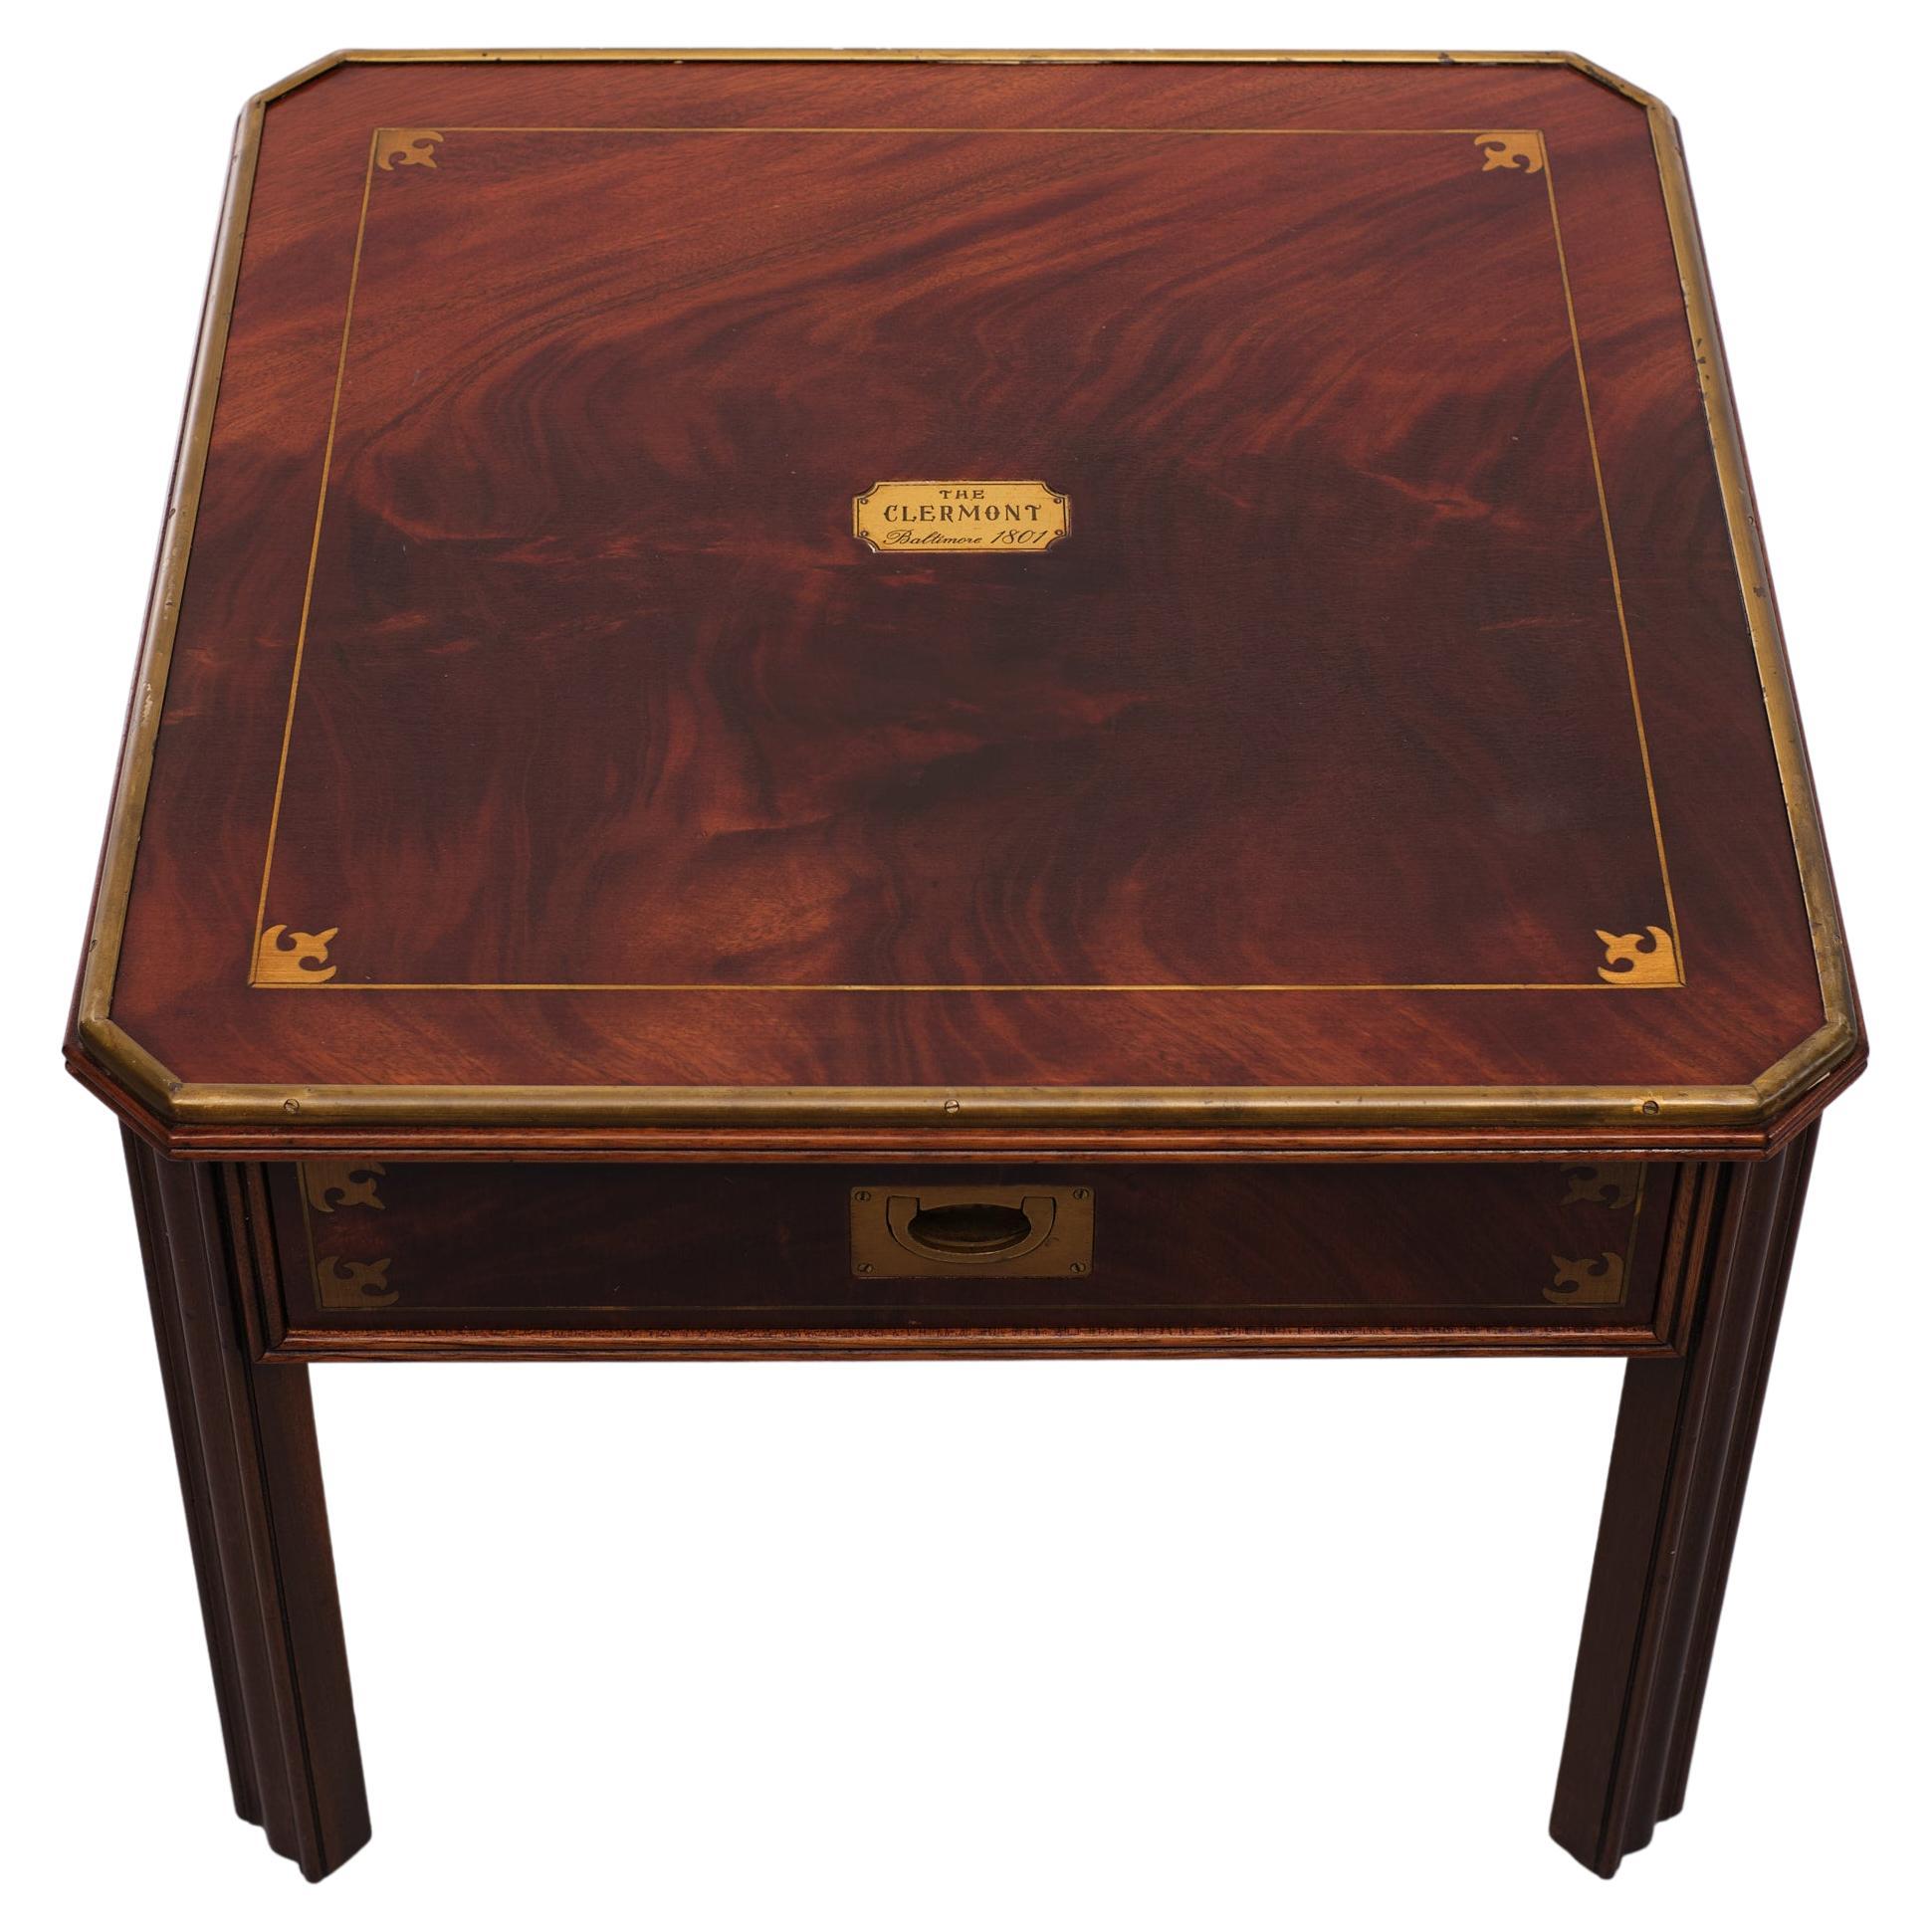 Beautiful side table mahogany frame comes with Brass inlay champaign style 
One drawer. with inset drop handles. Signed The Clermount Baltimore 1801 
This table has some history, it's reputedly made from the timber of the Paddle steamer Clermont,